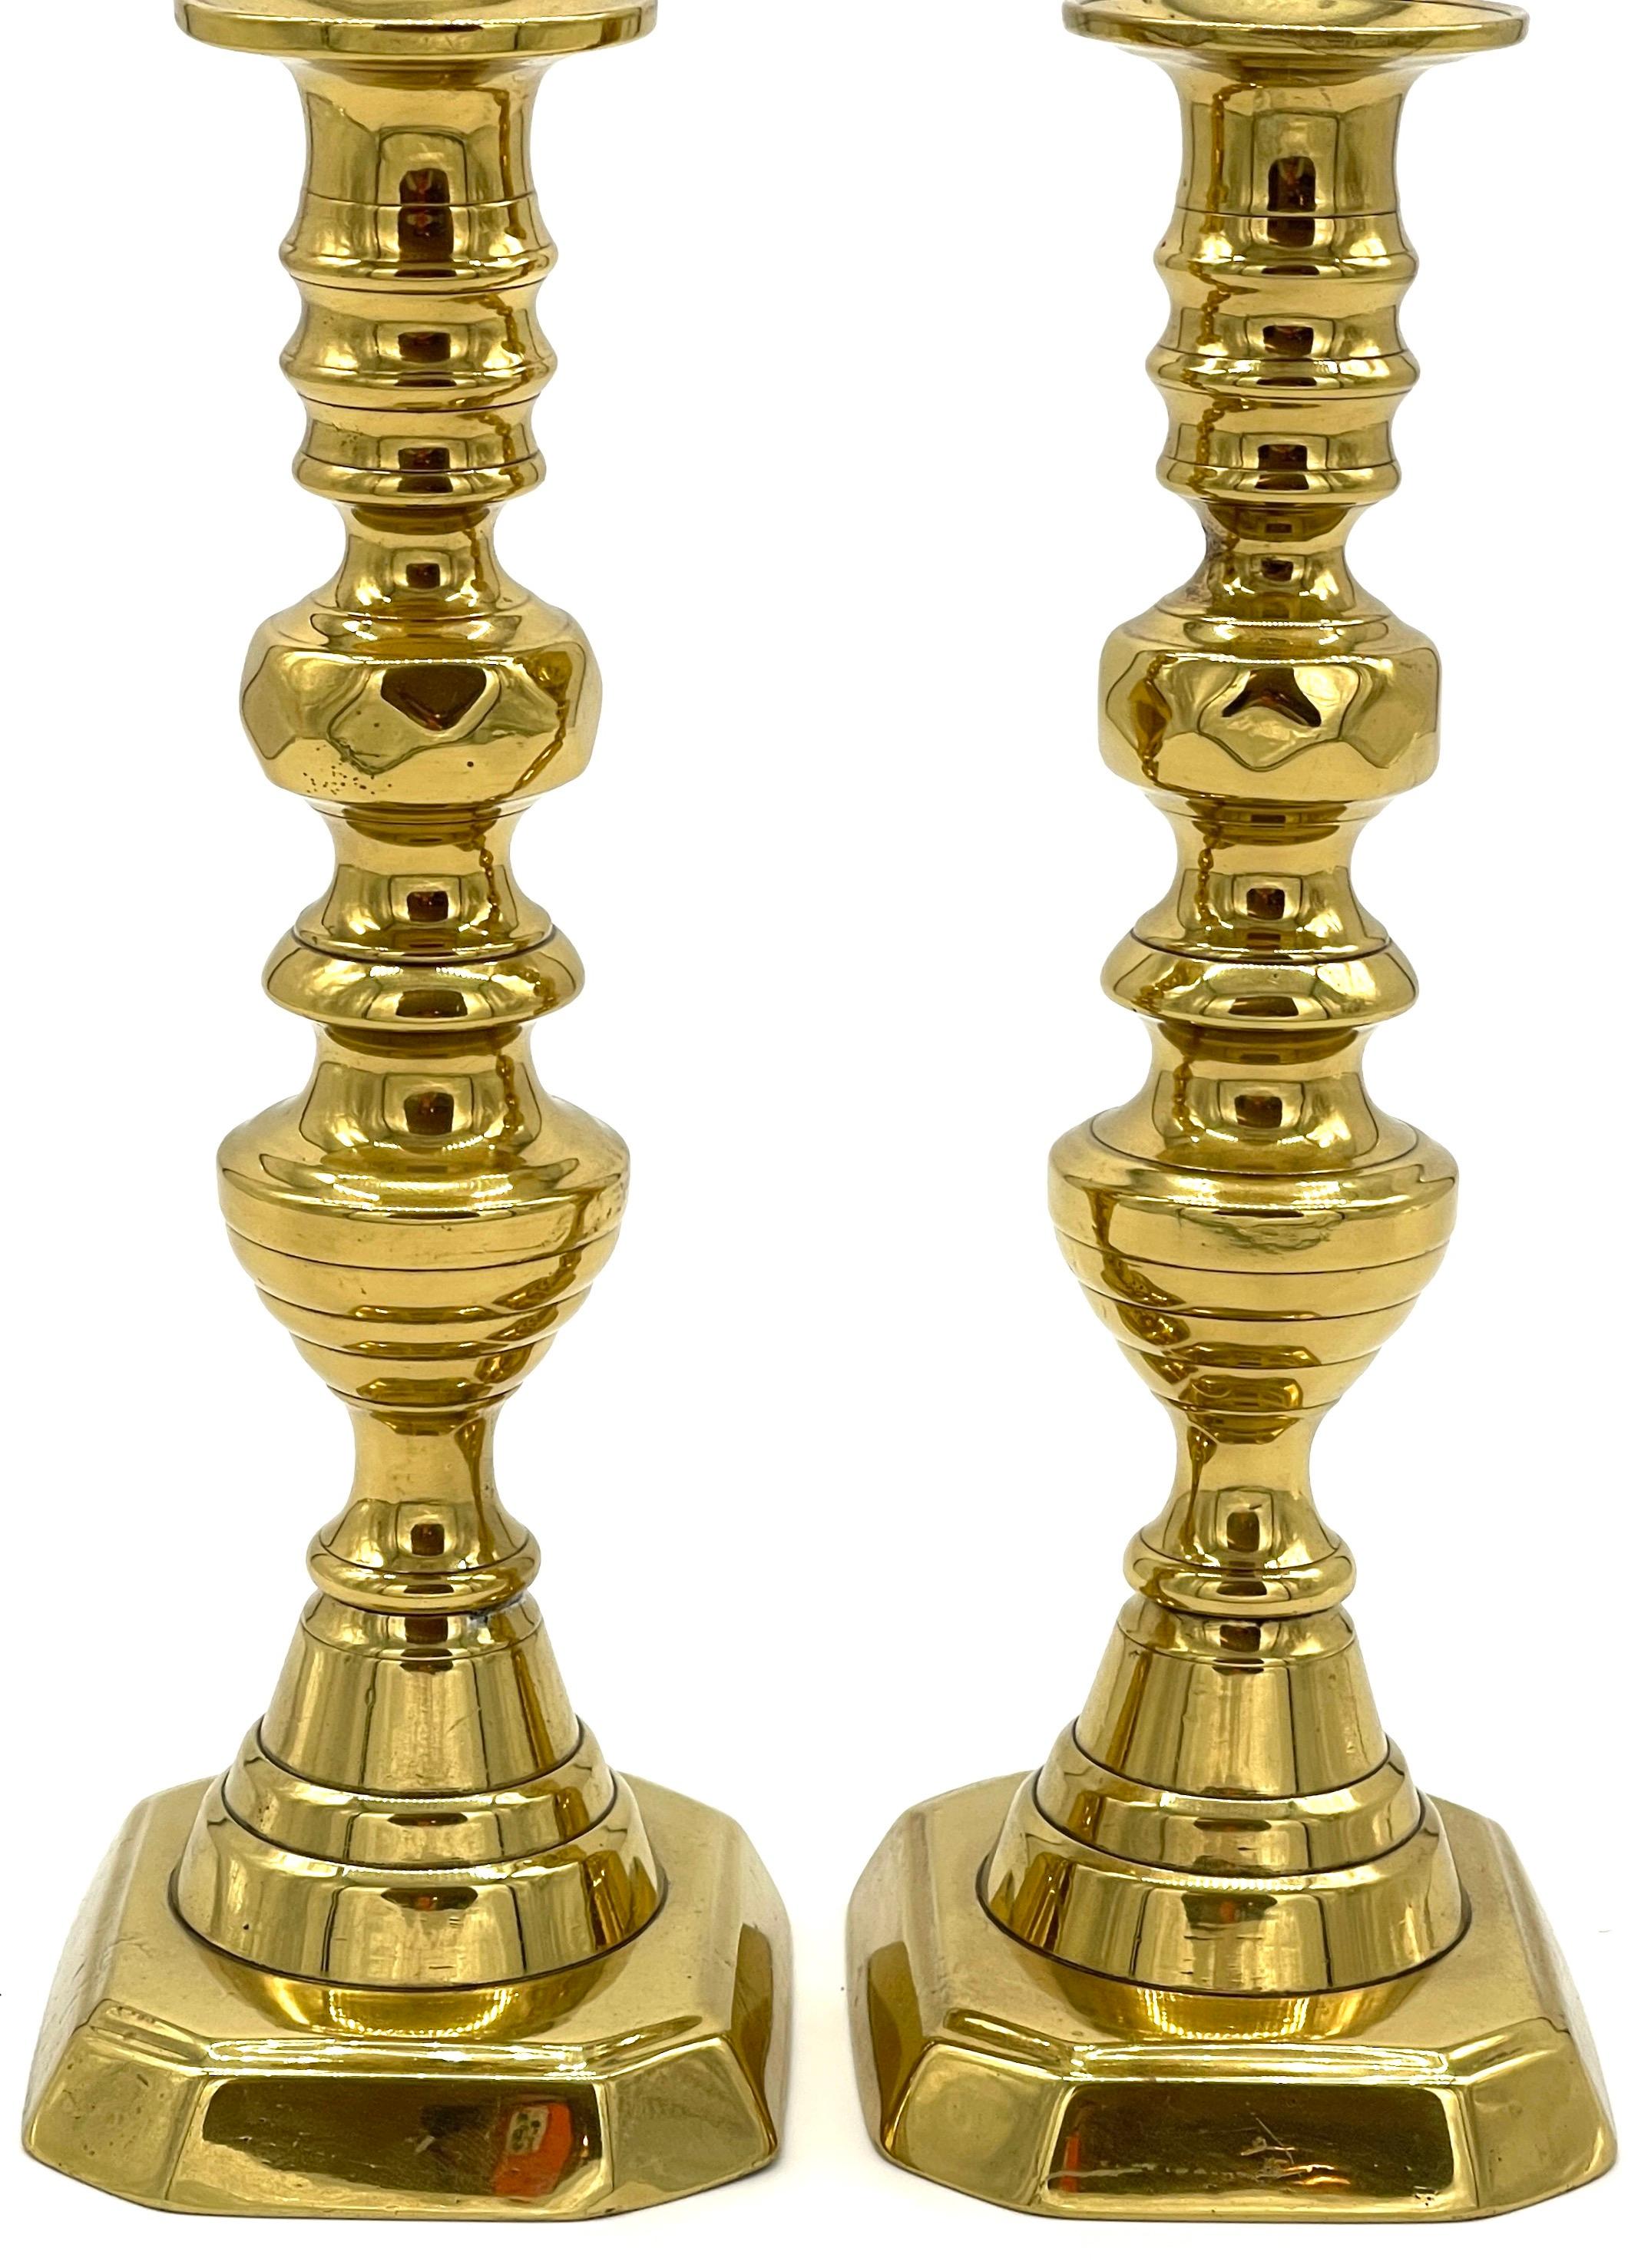 Pair of  19th C. English Brass Beehive Push Up Candlesticks  In Good Condition For Sale In West Palm Beach, FL